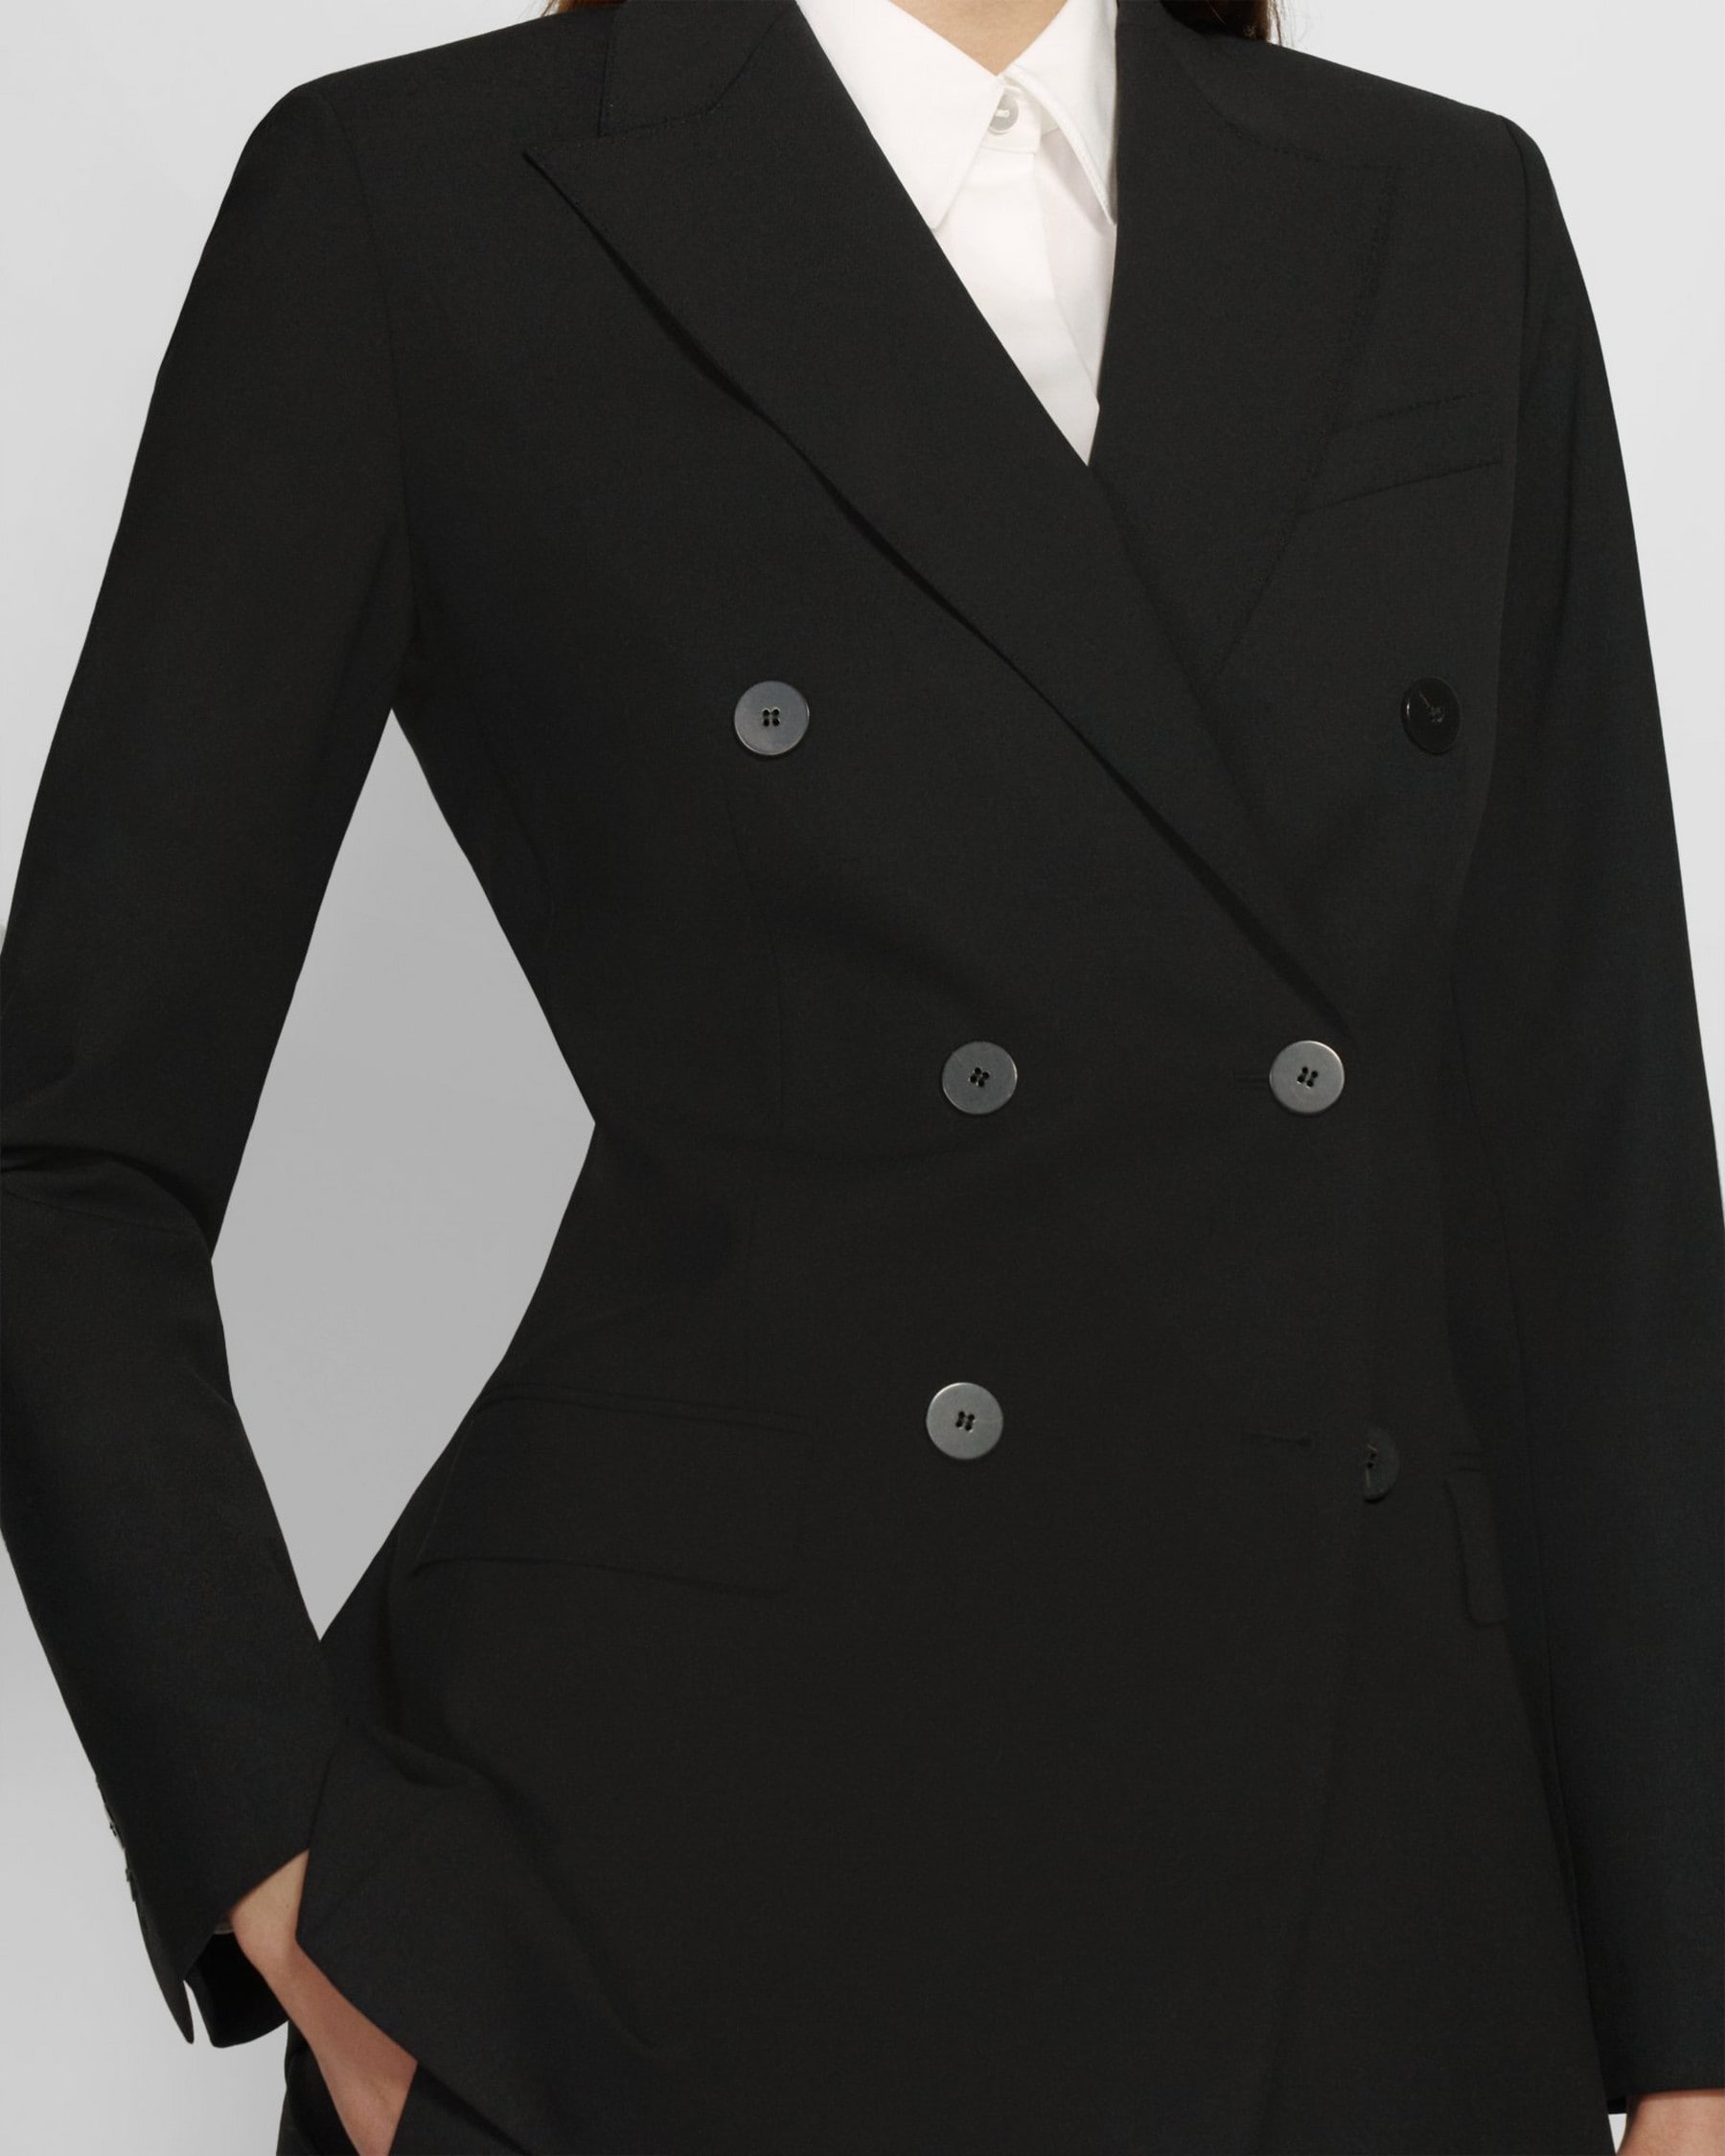 Double-Breasted Blazer in Good Wool